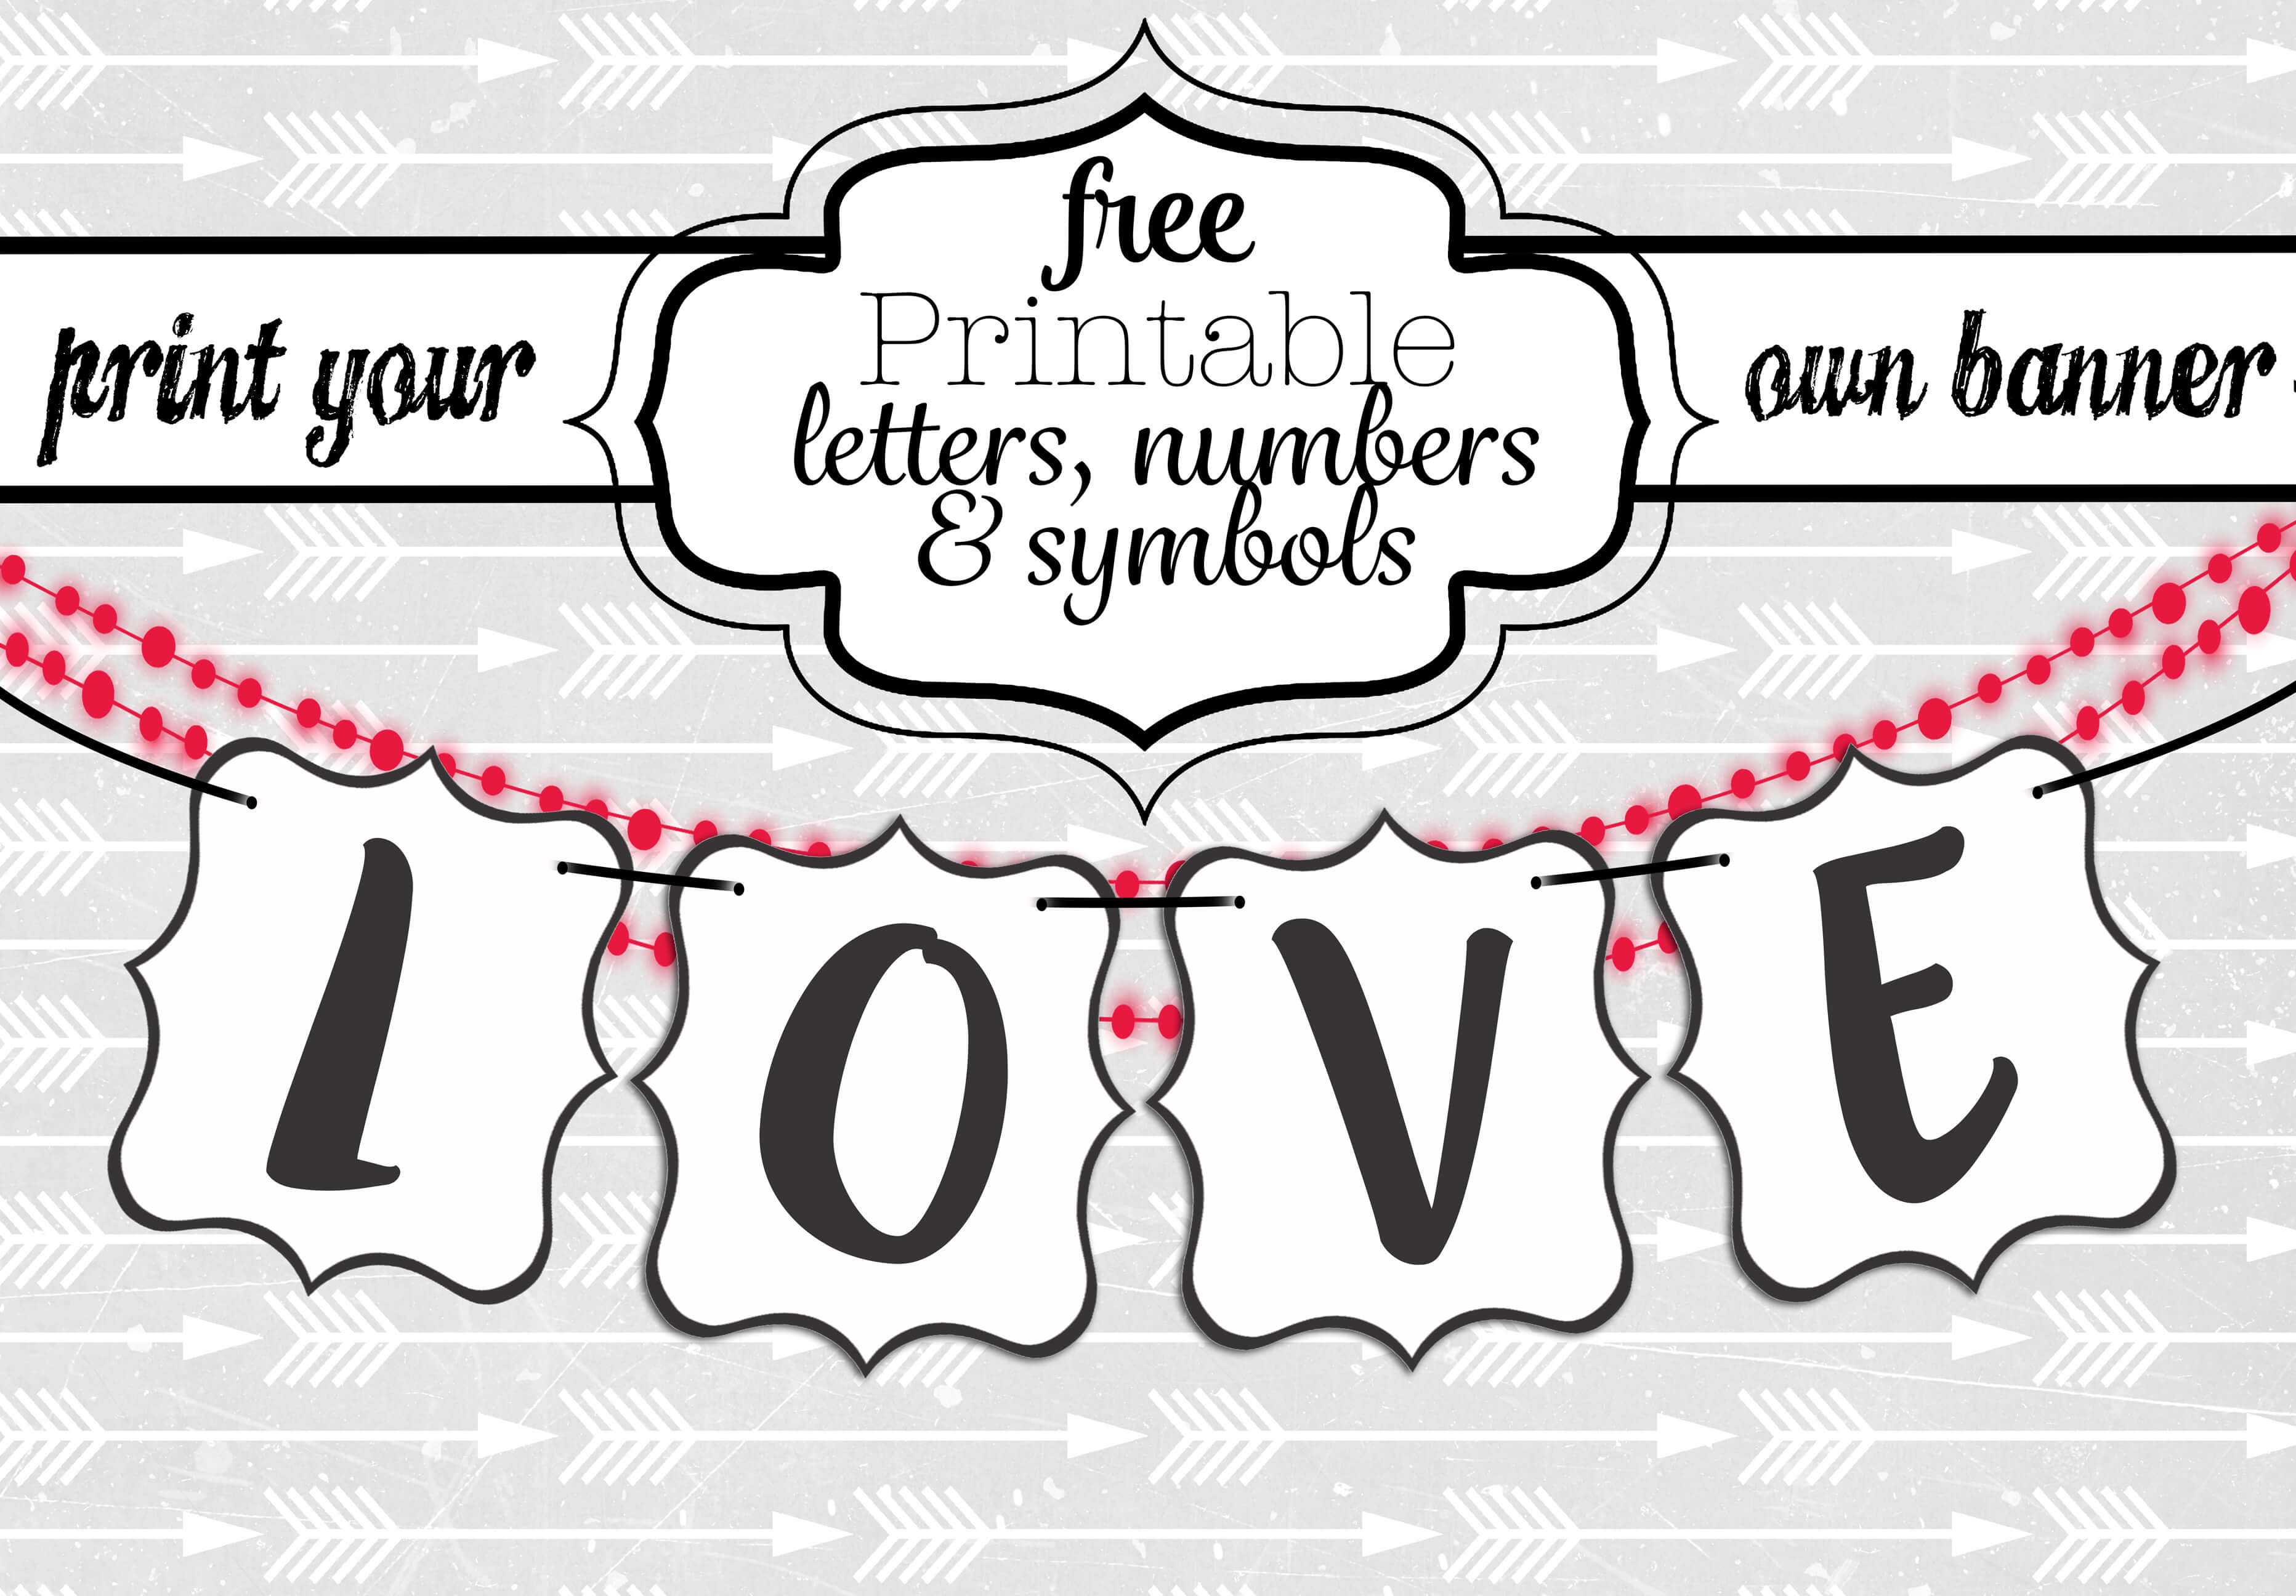 Free Large Printable Letters For Banners | Theveliger Pertaining To Free Letter Templates For Banners